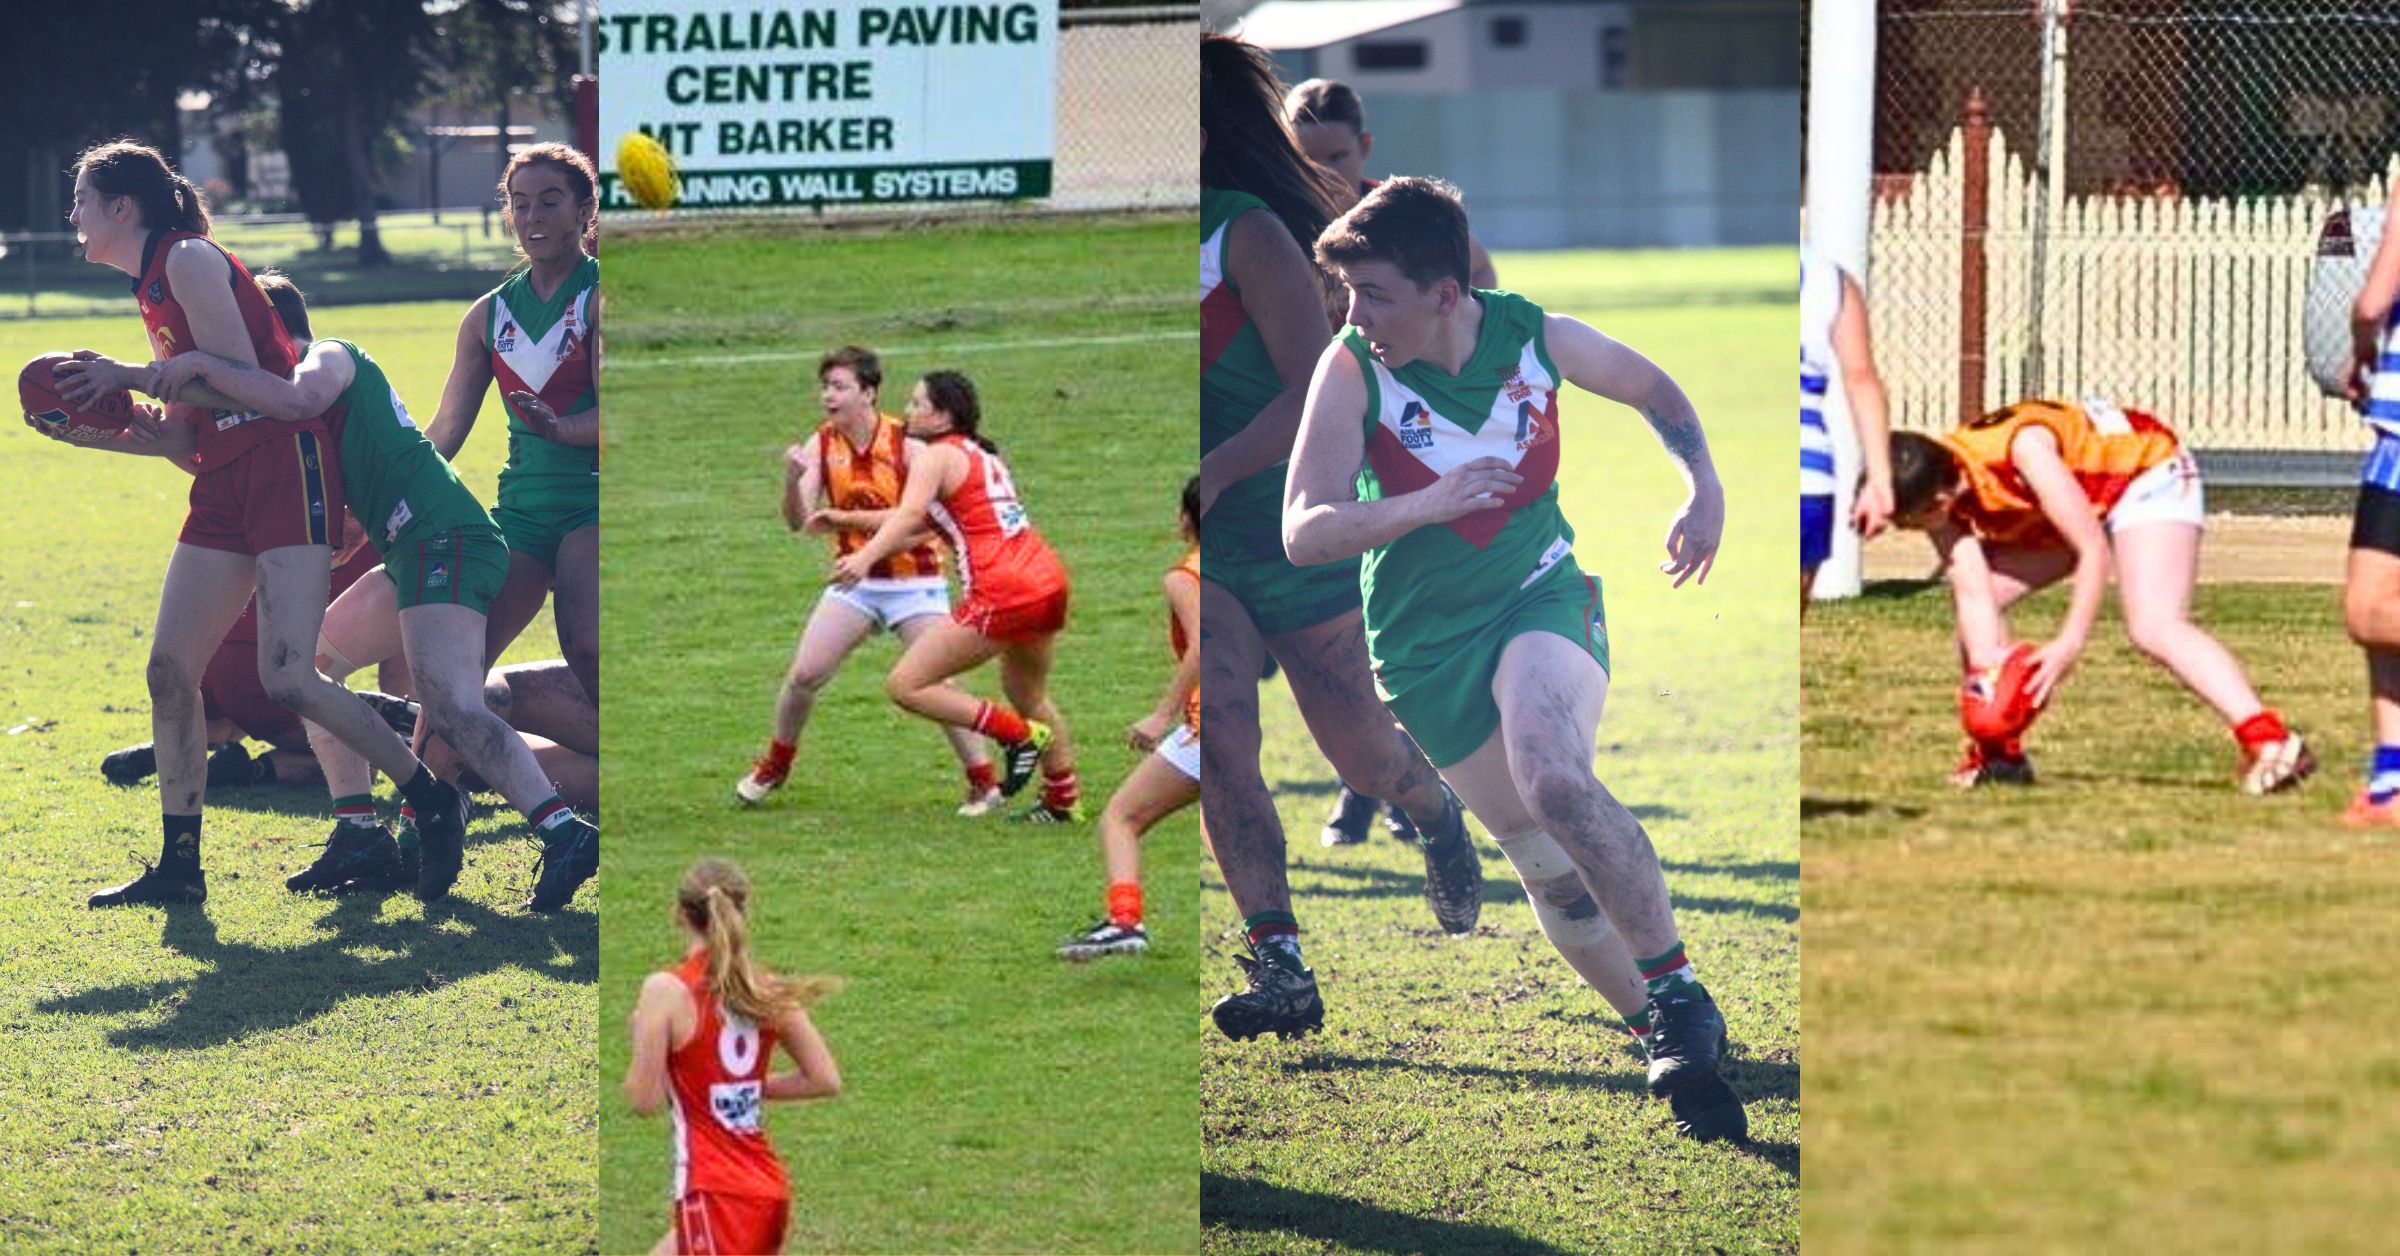 Four photographs featuring the same young woman playing Aussie rules football with gusto, running and tackling. She is wearing two different uniforms in different photos, one green, one red. She is fair skinned with short brown hair.